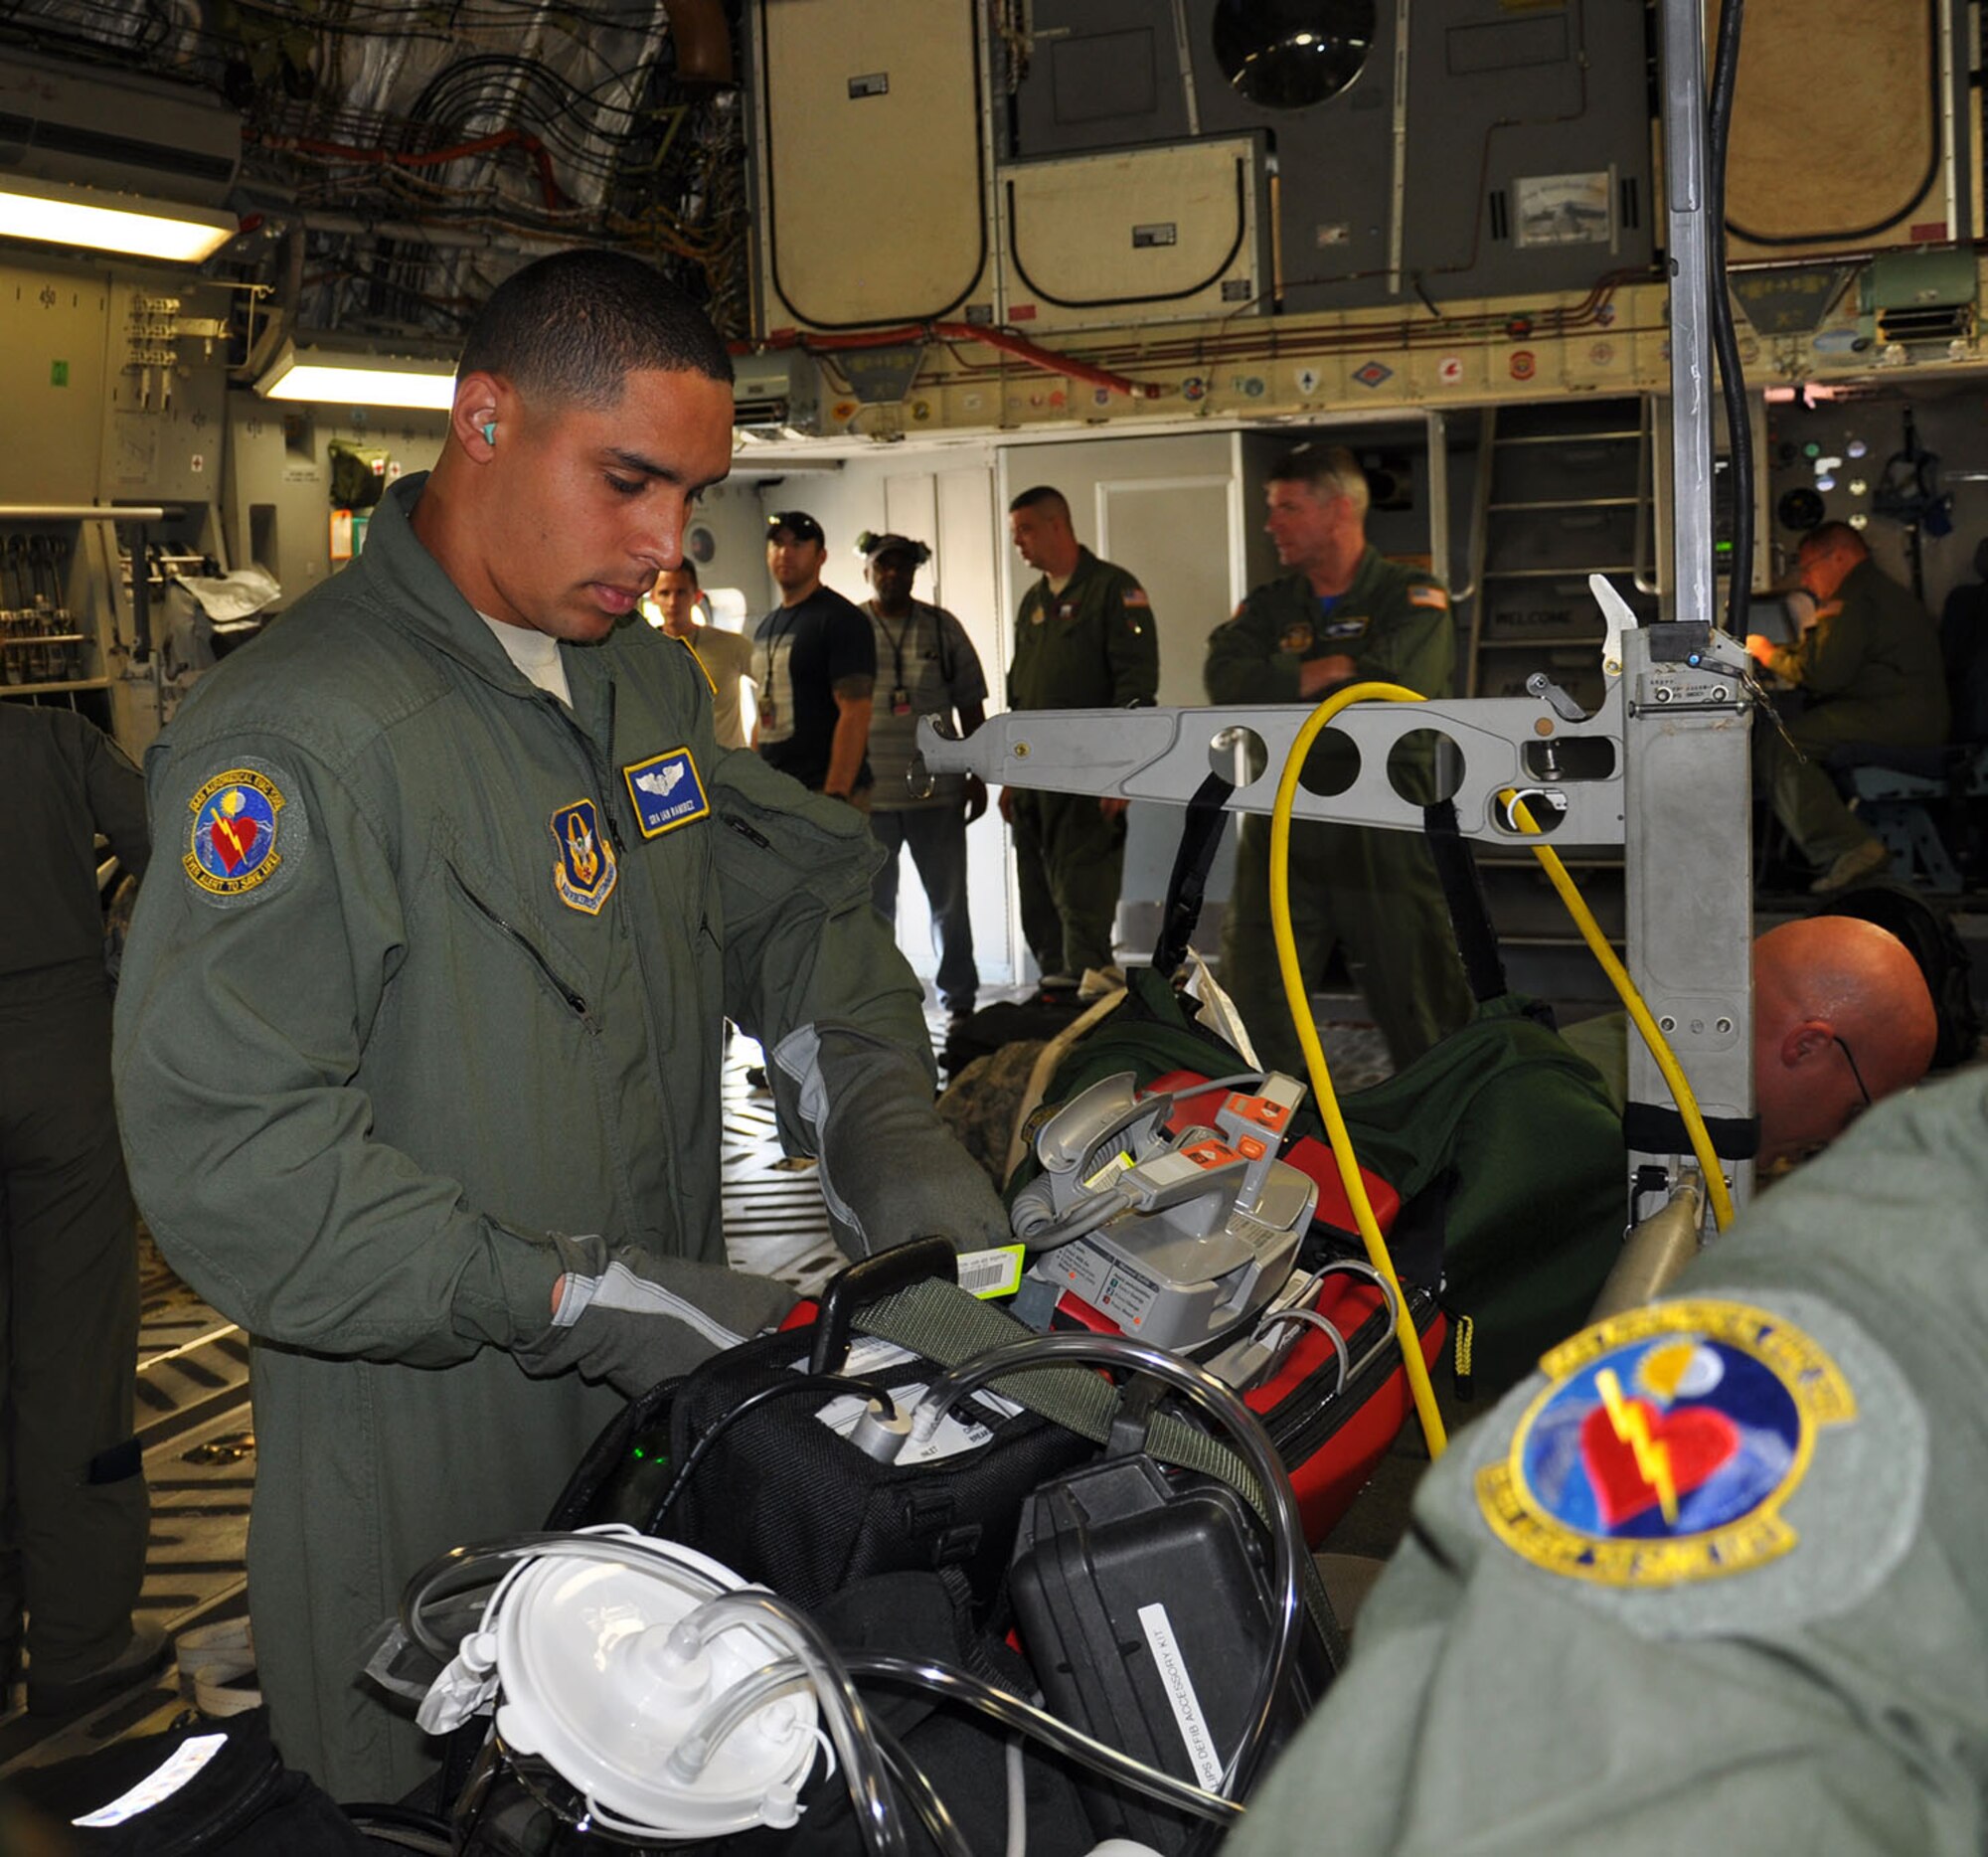 WRIGHT-PATTERSON AIR FORCE BASE, Ohio - Senior Airman Ian Ramirez, an aeromedical evacuation technician assigned to the 445th Aeromedical Evacuation Squadron, prepares for a training mission on board a 445th Airlift Wing C-17 Globemaster III May 29, 2015. (U.S. Air Force photo/Master Sgt. Carie Brown)